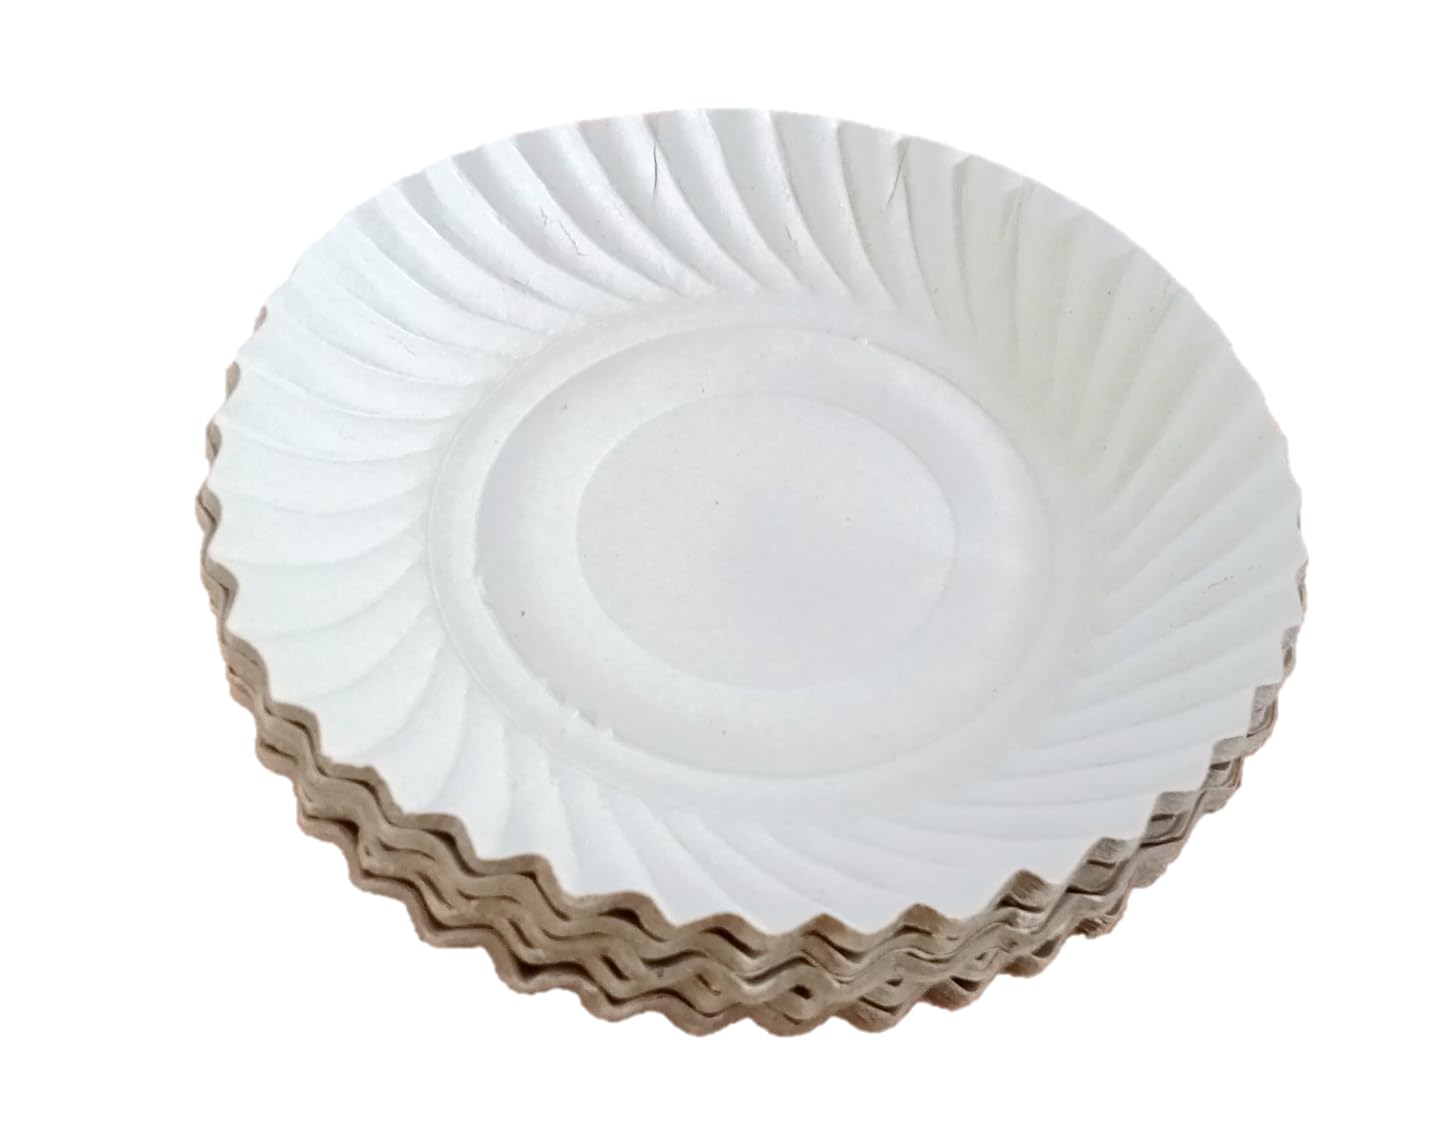 Biodegradable 9 inch Round White Paper Plates, for Parties and Family Events, Disposable Pack of 20 Plates